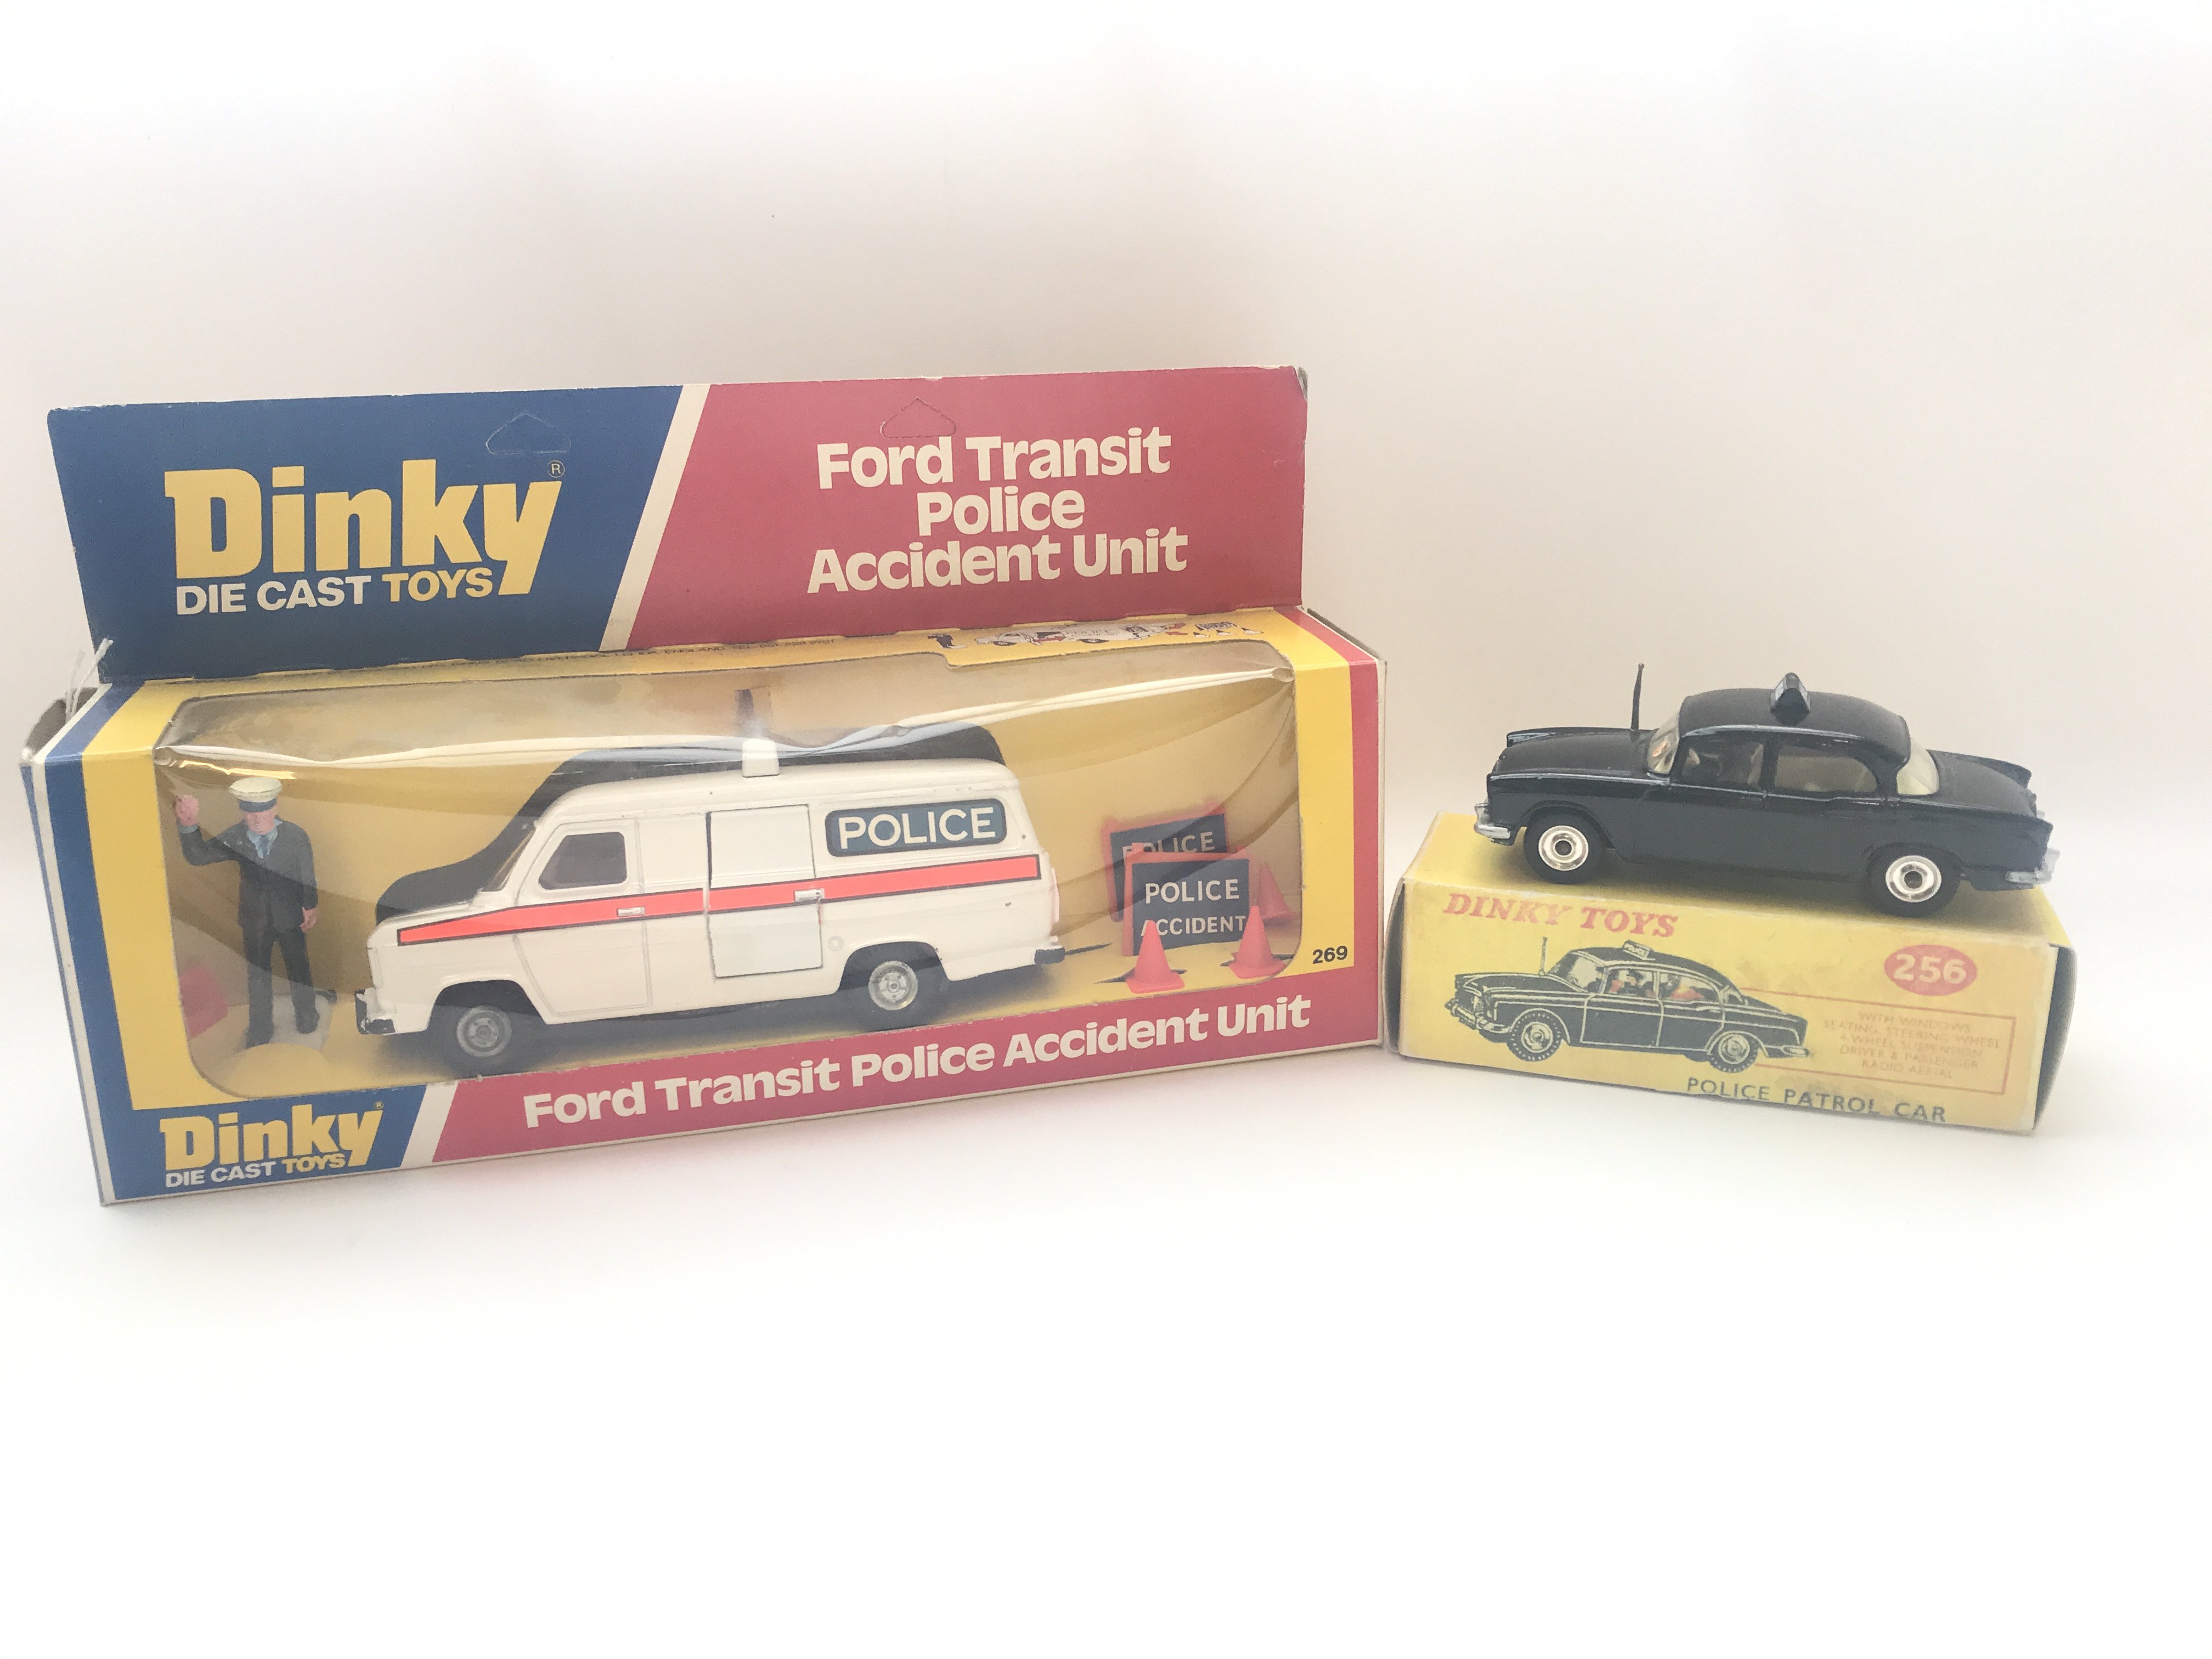 A Dinky Ford Transit Police Accident Unit #269 box